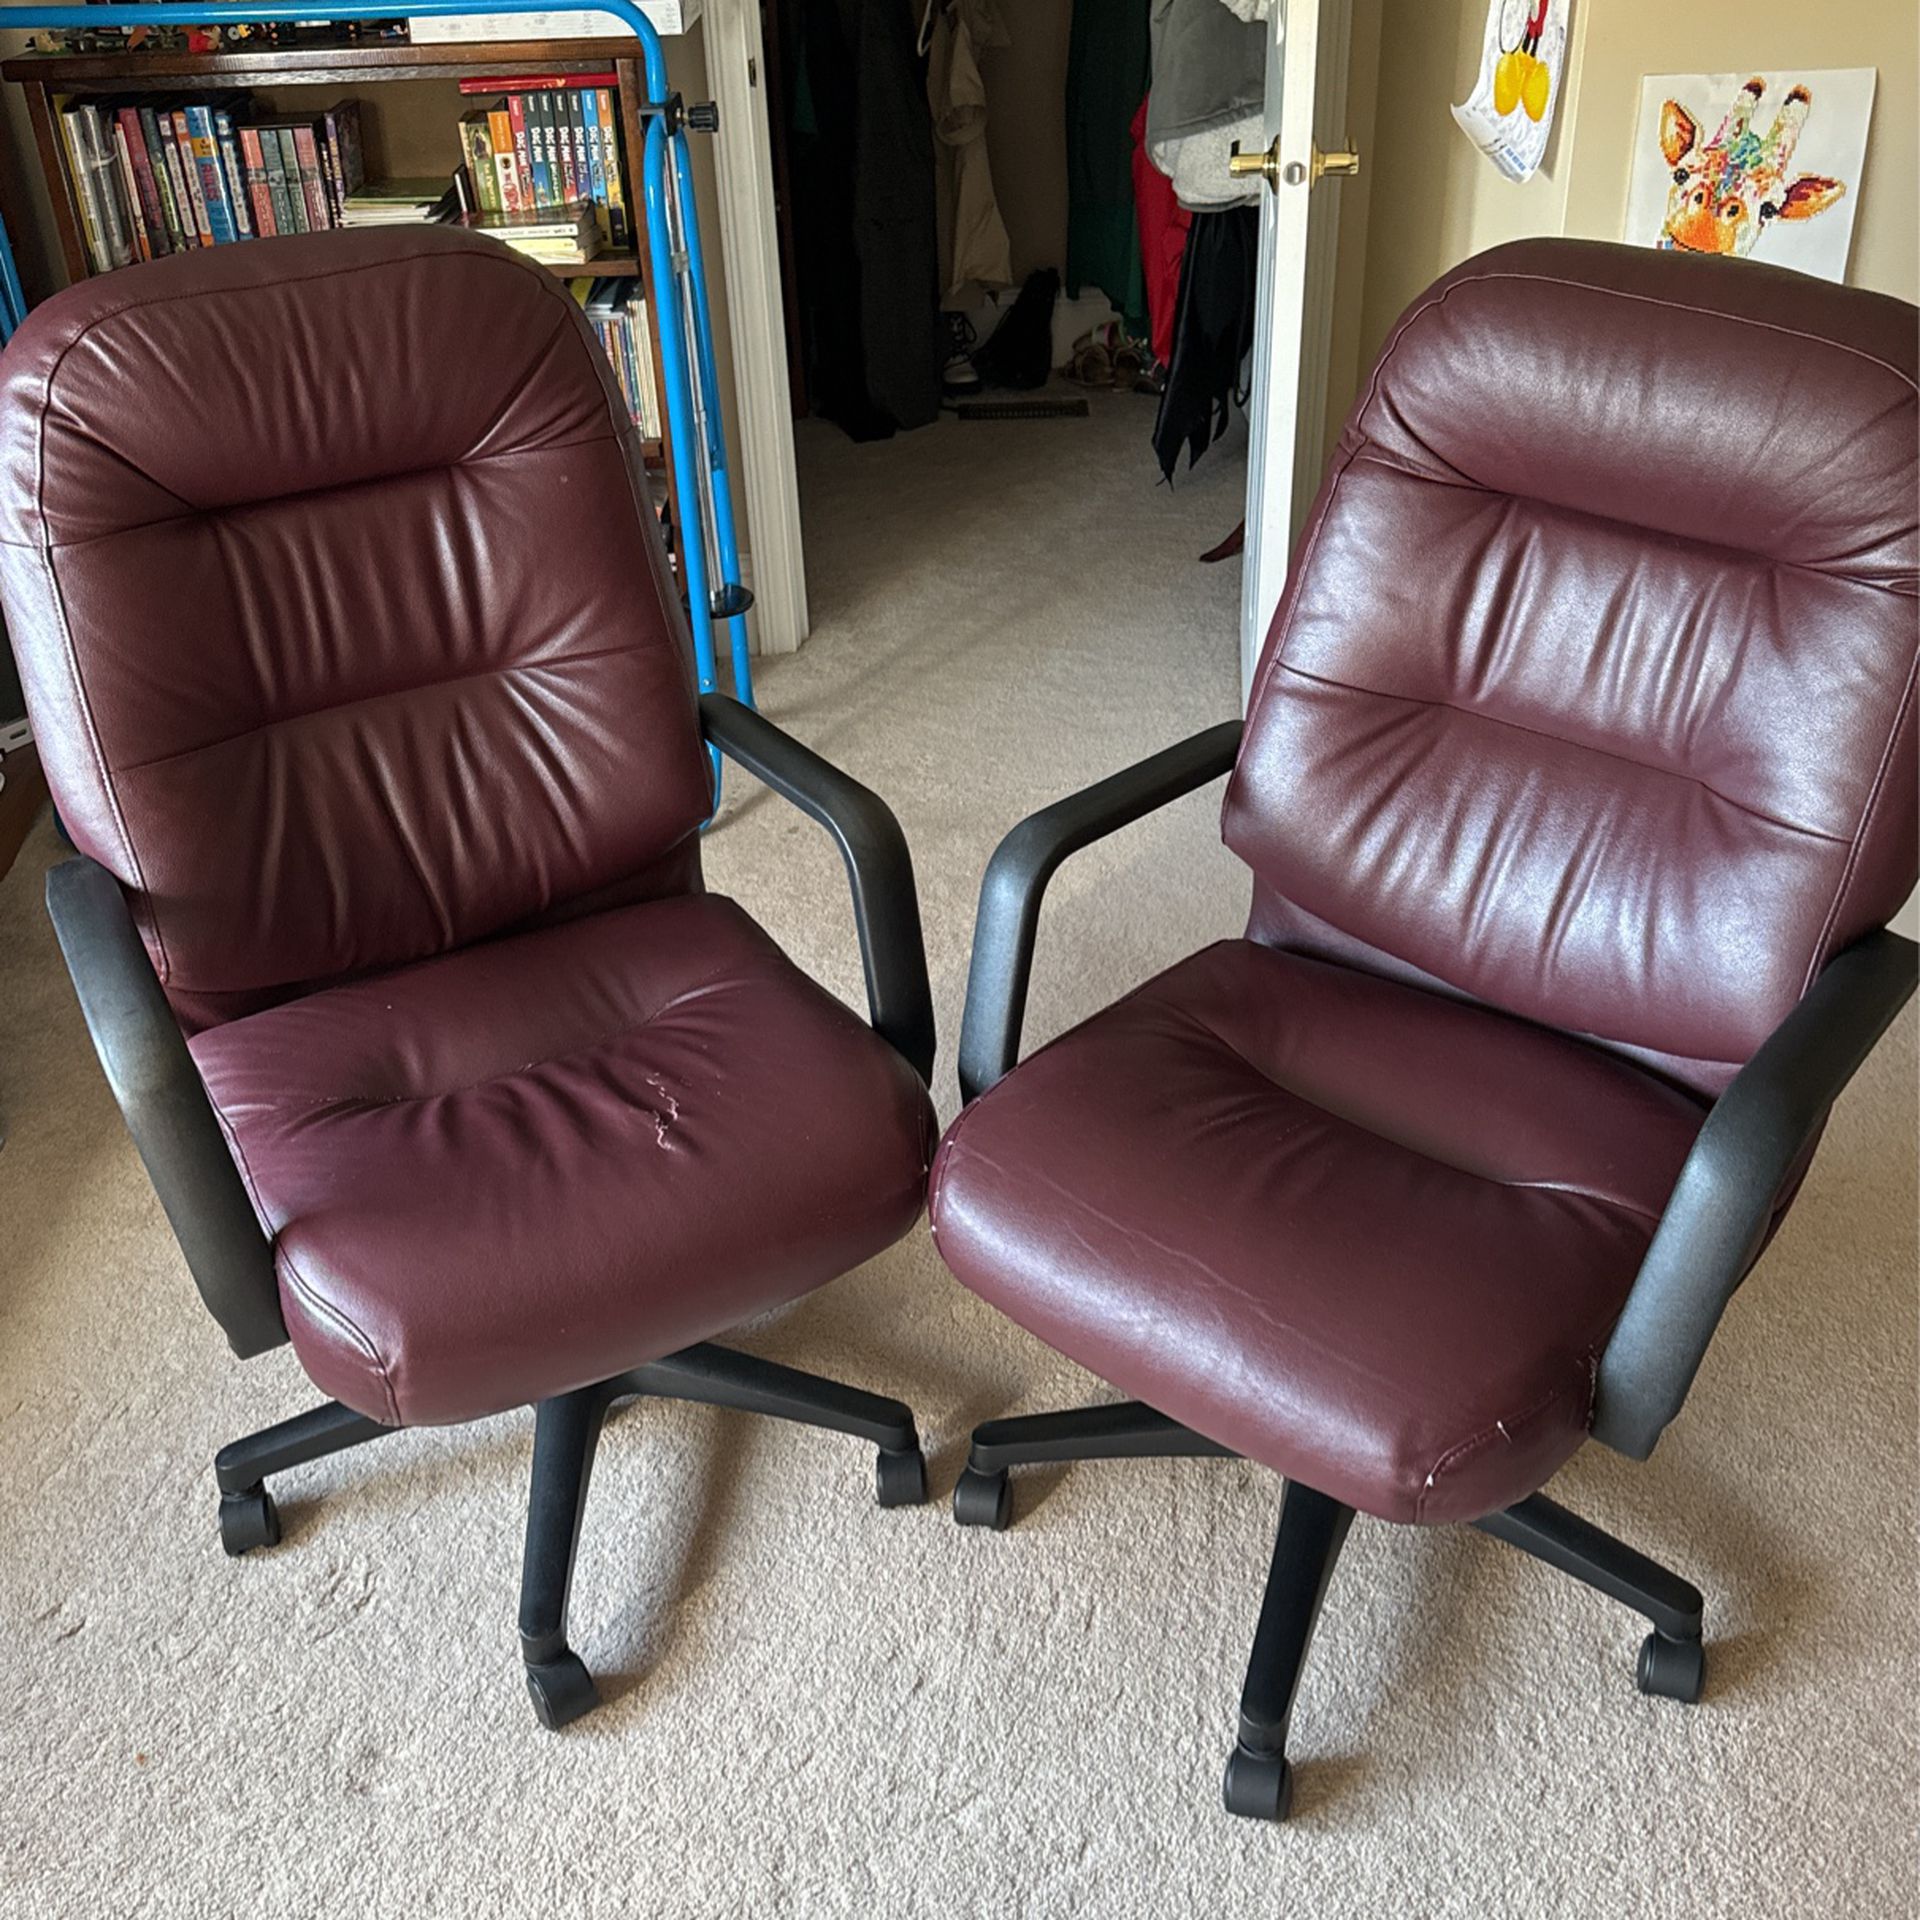 Large Office Chairs (2) Spin/recline